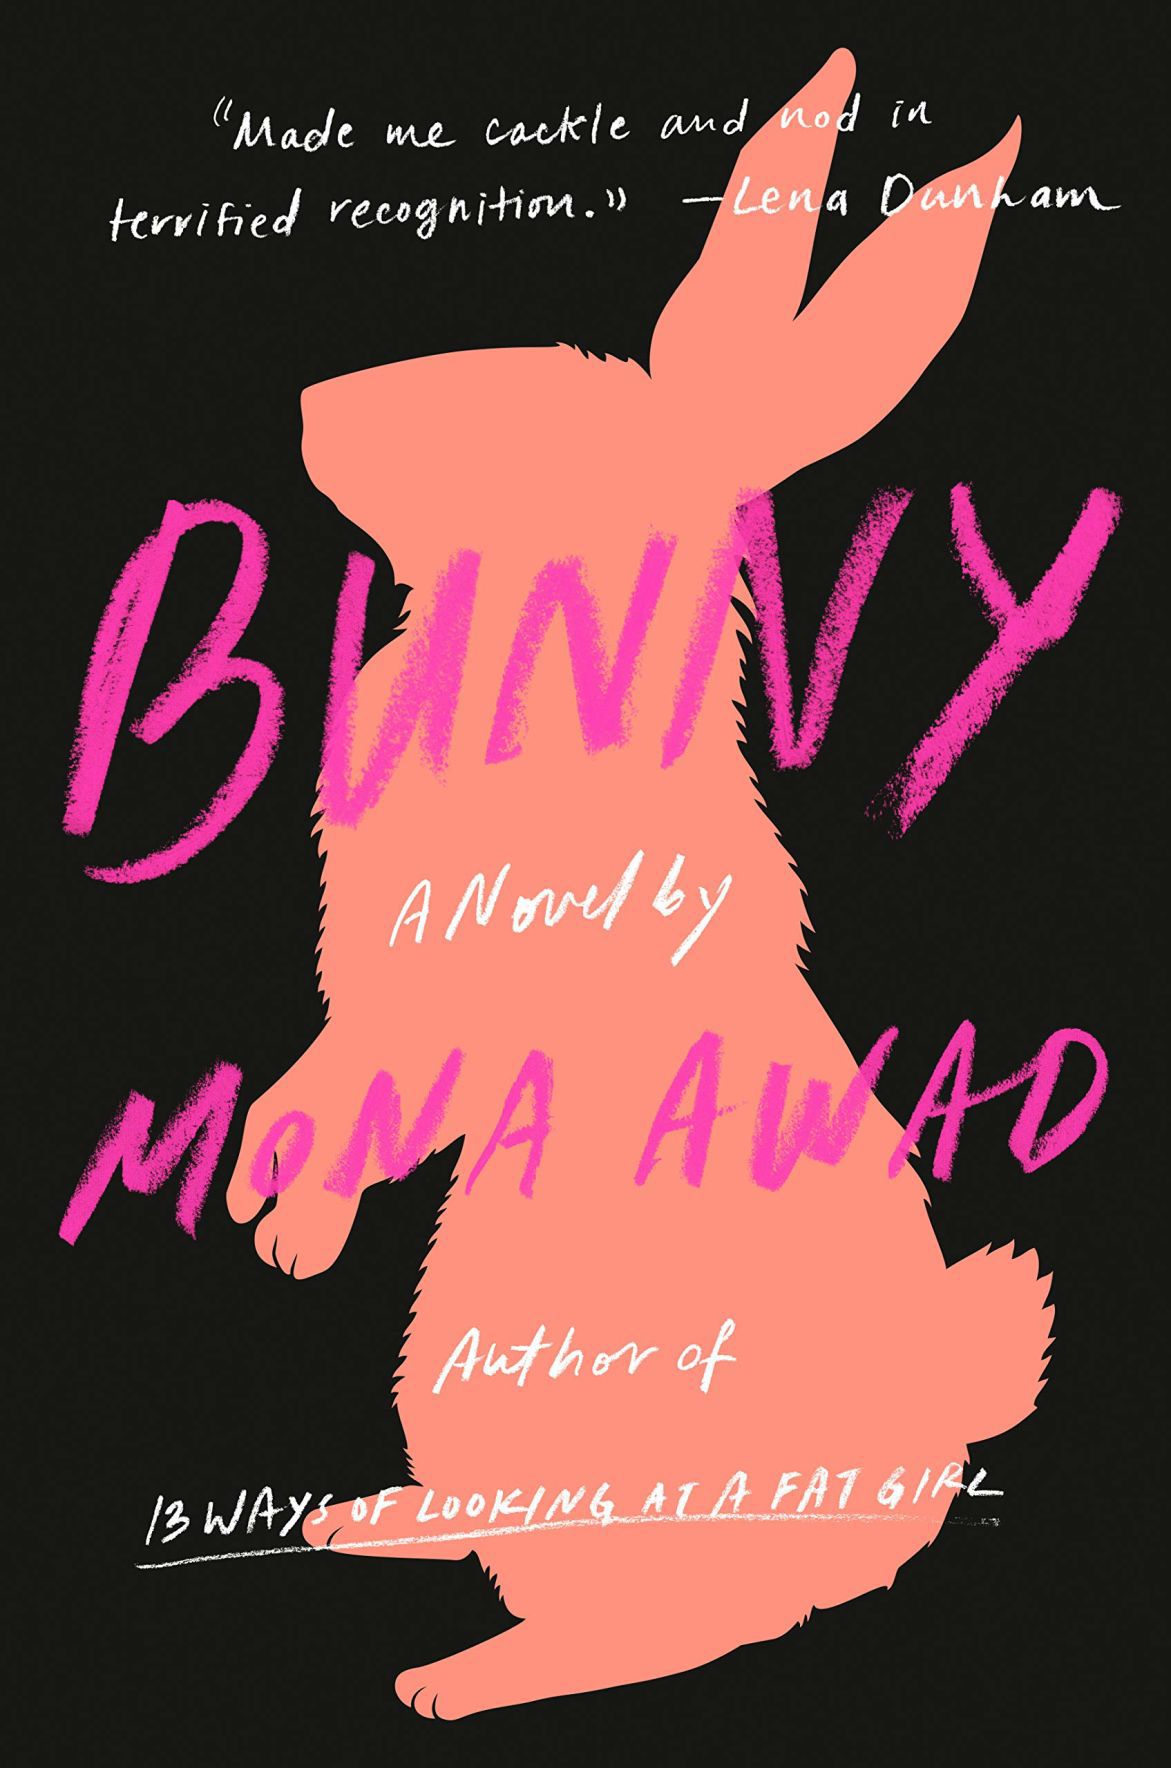 The cover of Mona Awad's book